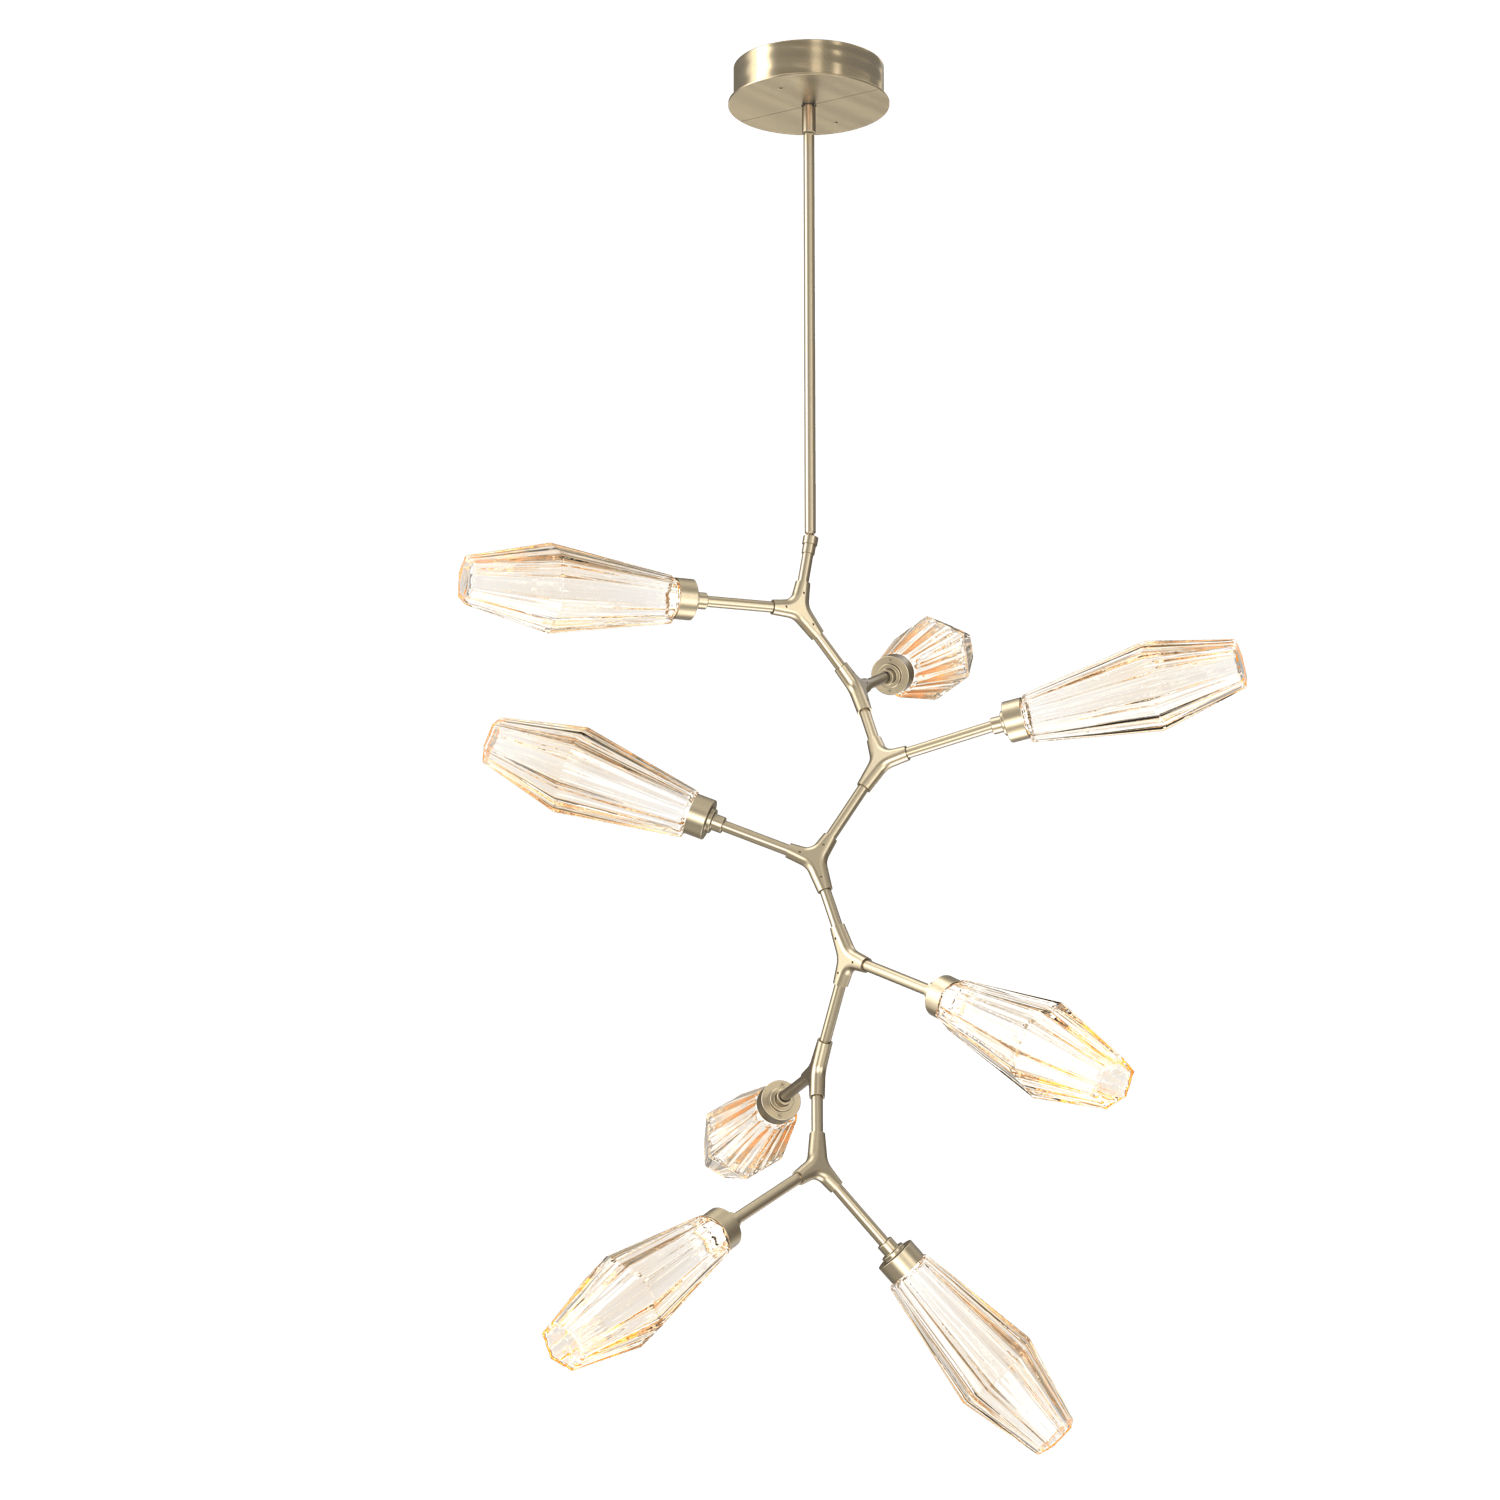 CHB0049-VB-HB-RA-Hammerton-Studio-Aalto-8-light-modern-vine-chandelier-with-heritage-brass-finish-and-optic-ribbed-amber-glass-shades-and-LED-lamping